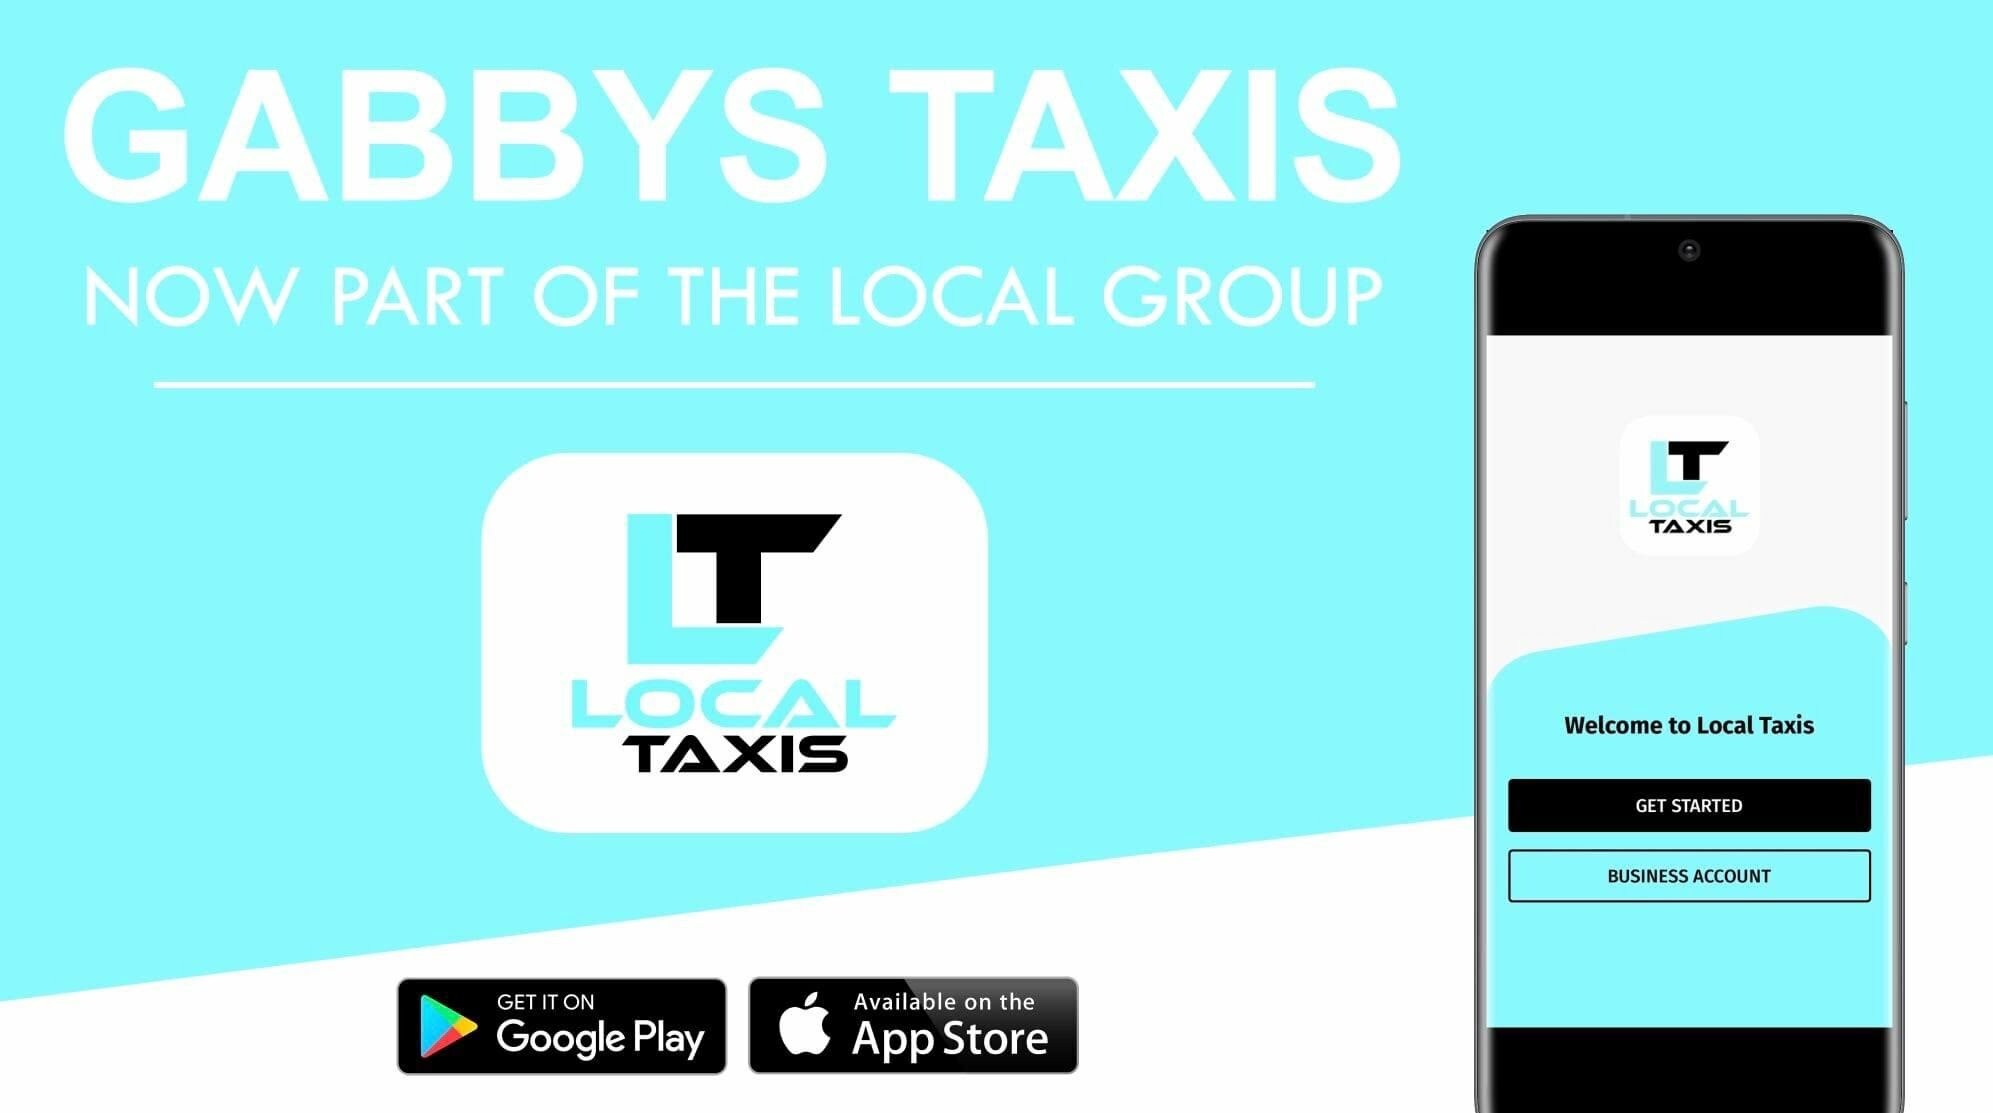 Sell your taxi business - Local Taxis